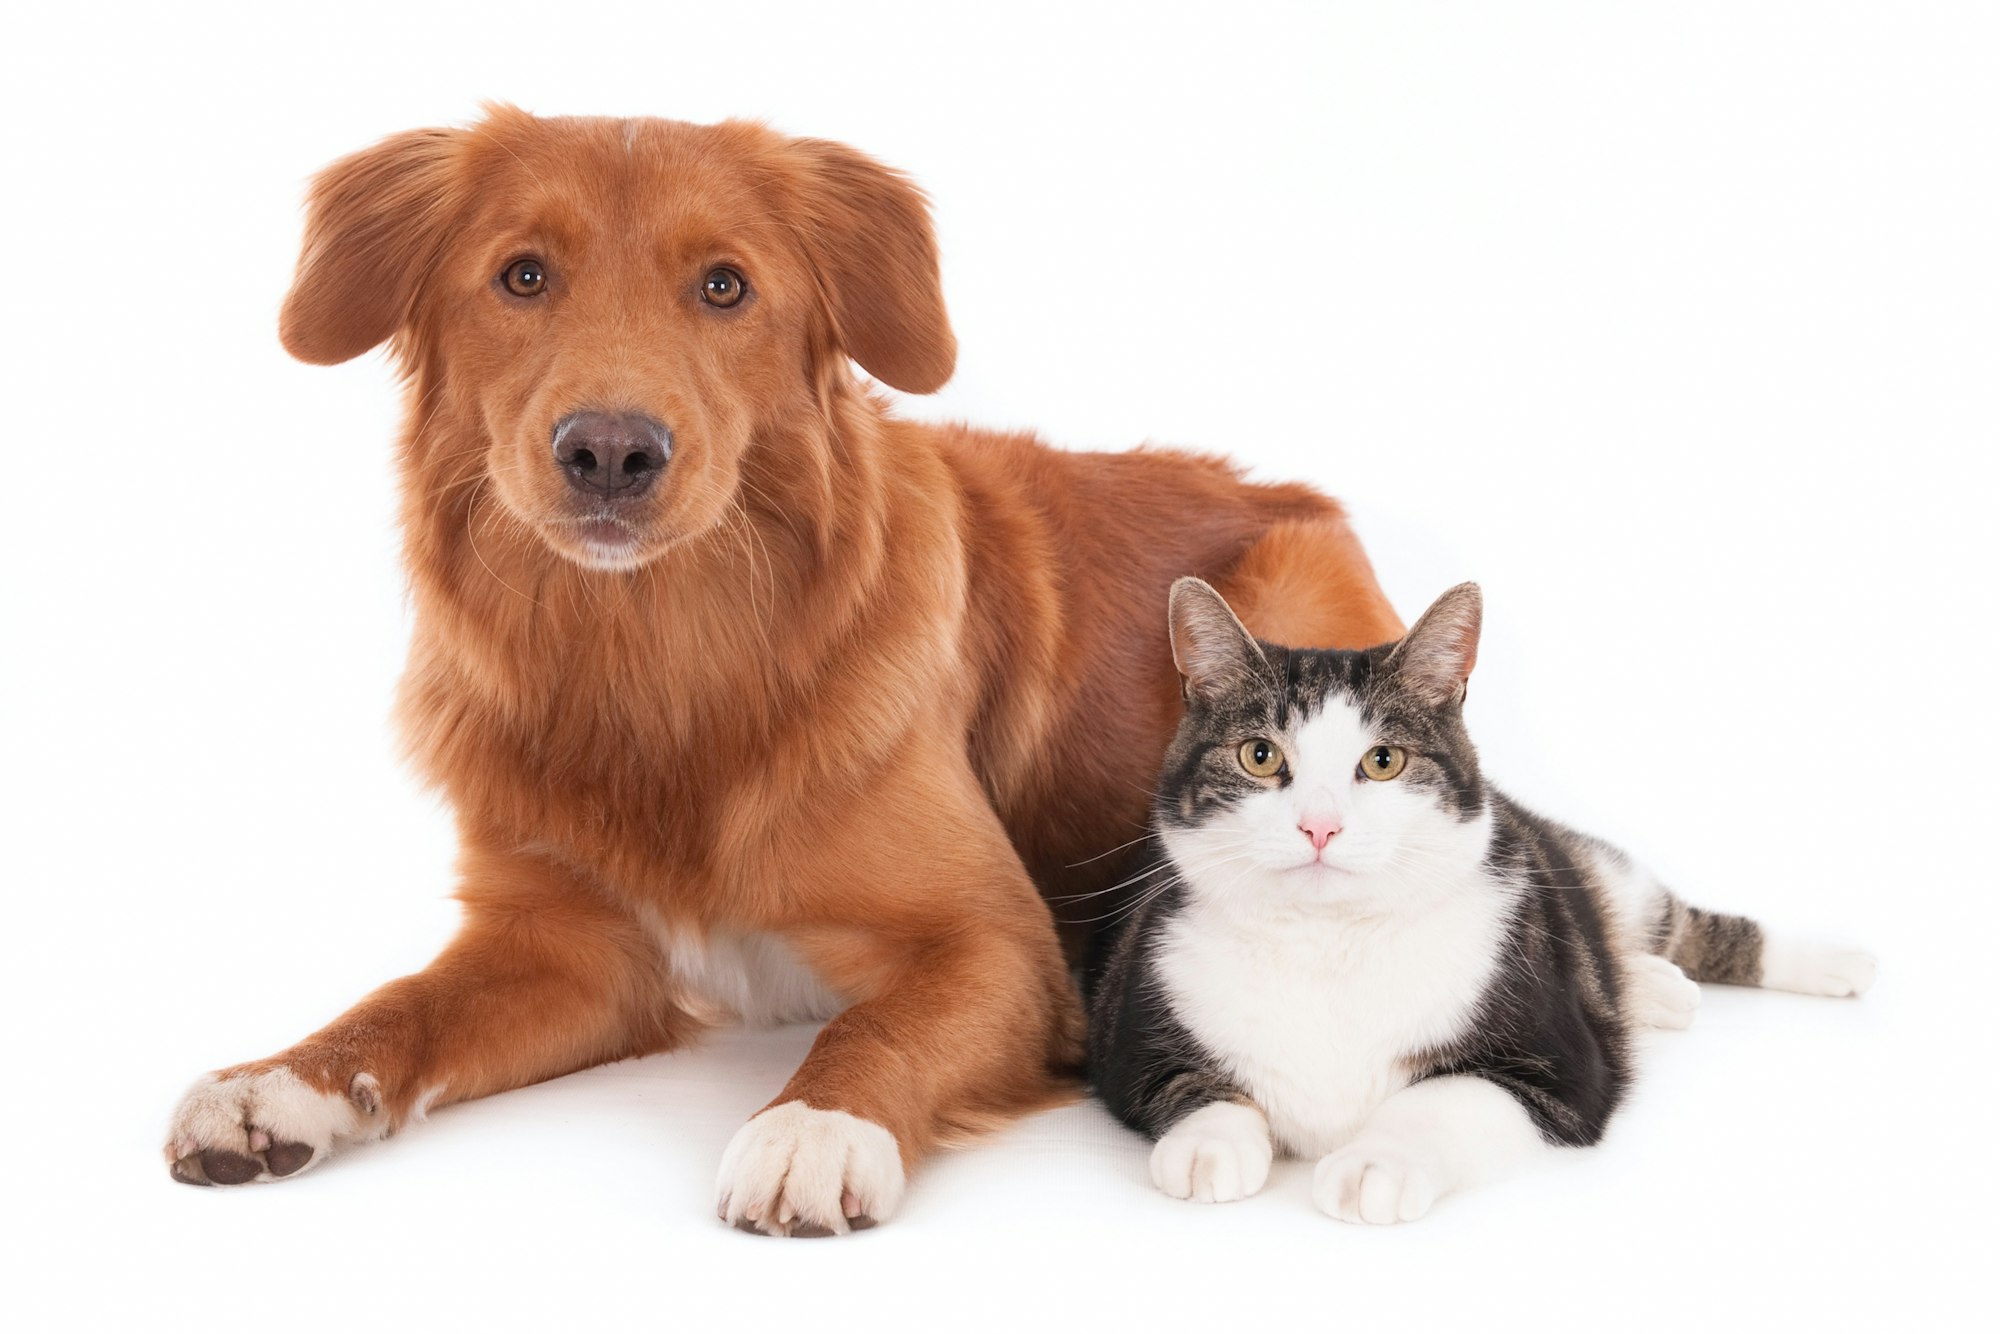 Closeup shot of a cat and a dog lying together isolated on a white background